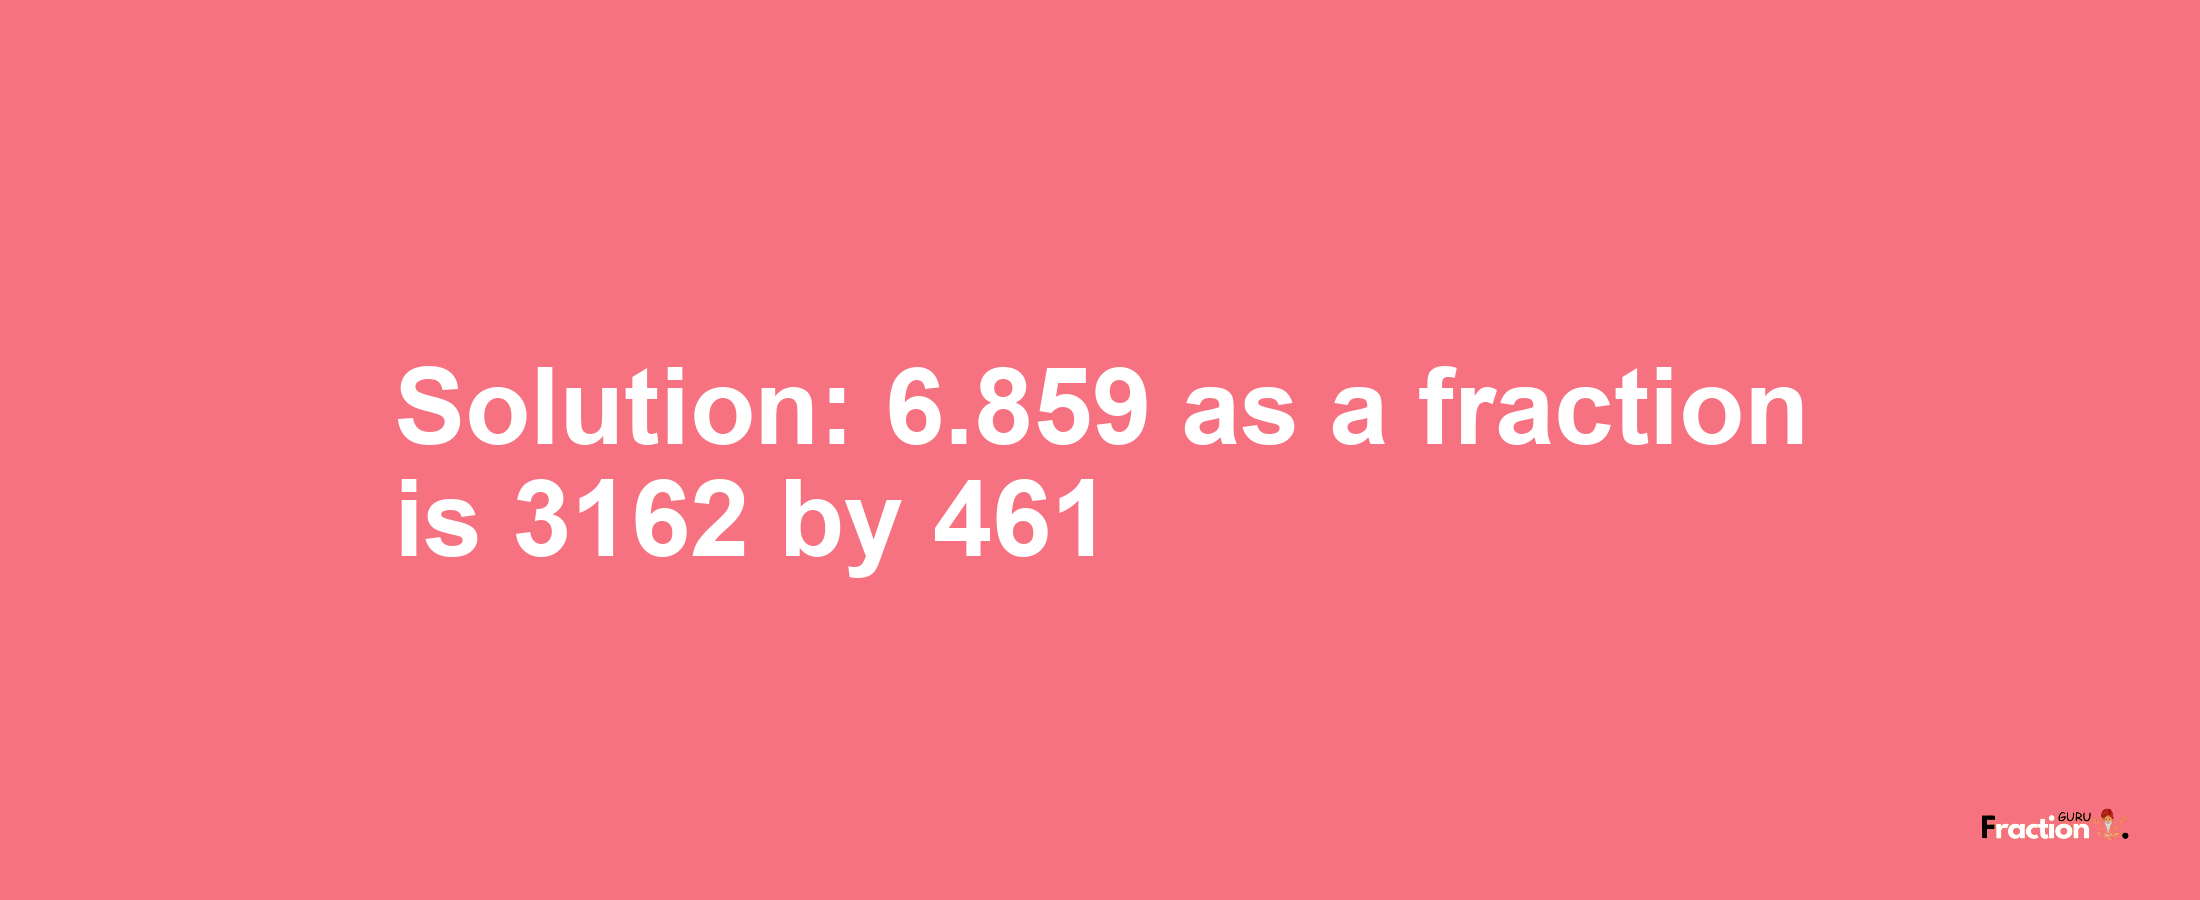 Solution:6.859 as a fraction is 3162/461